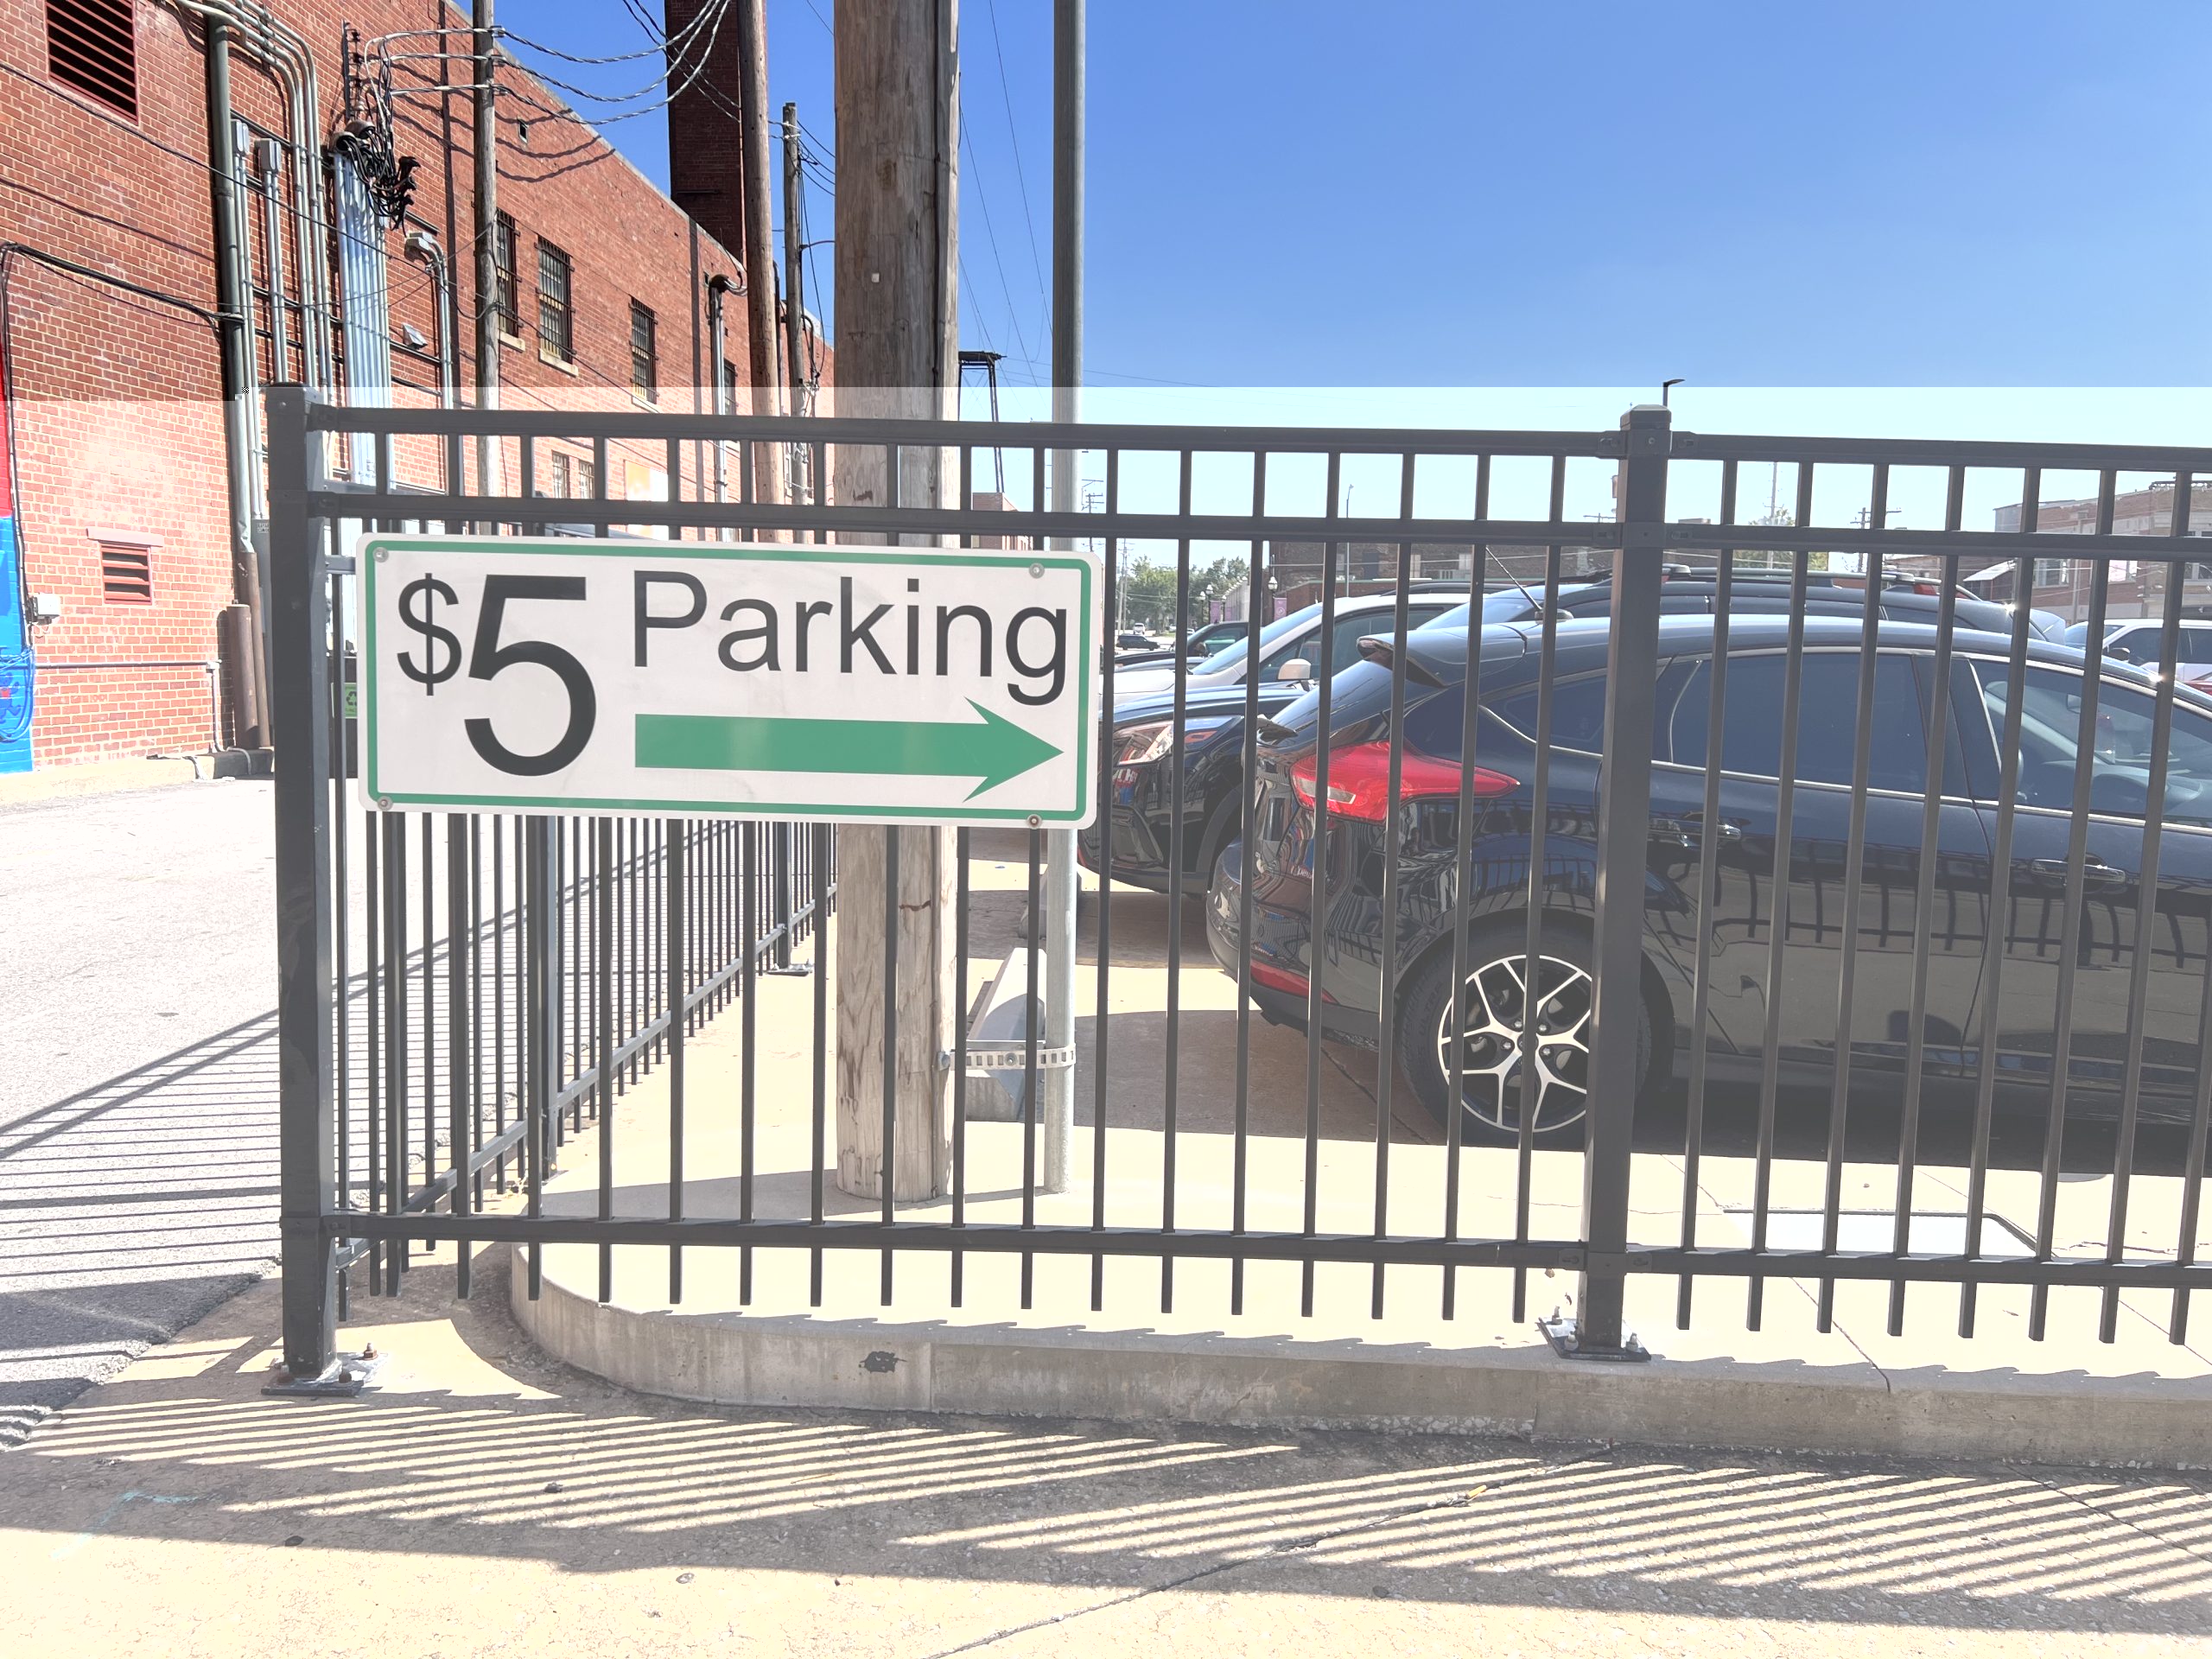 Study identifies problems, solutions for parking in downtown Springfield